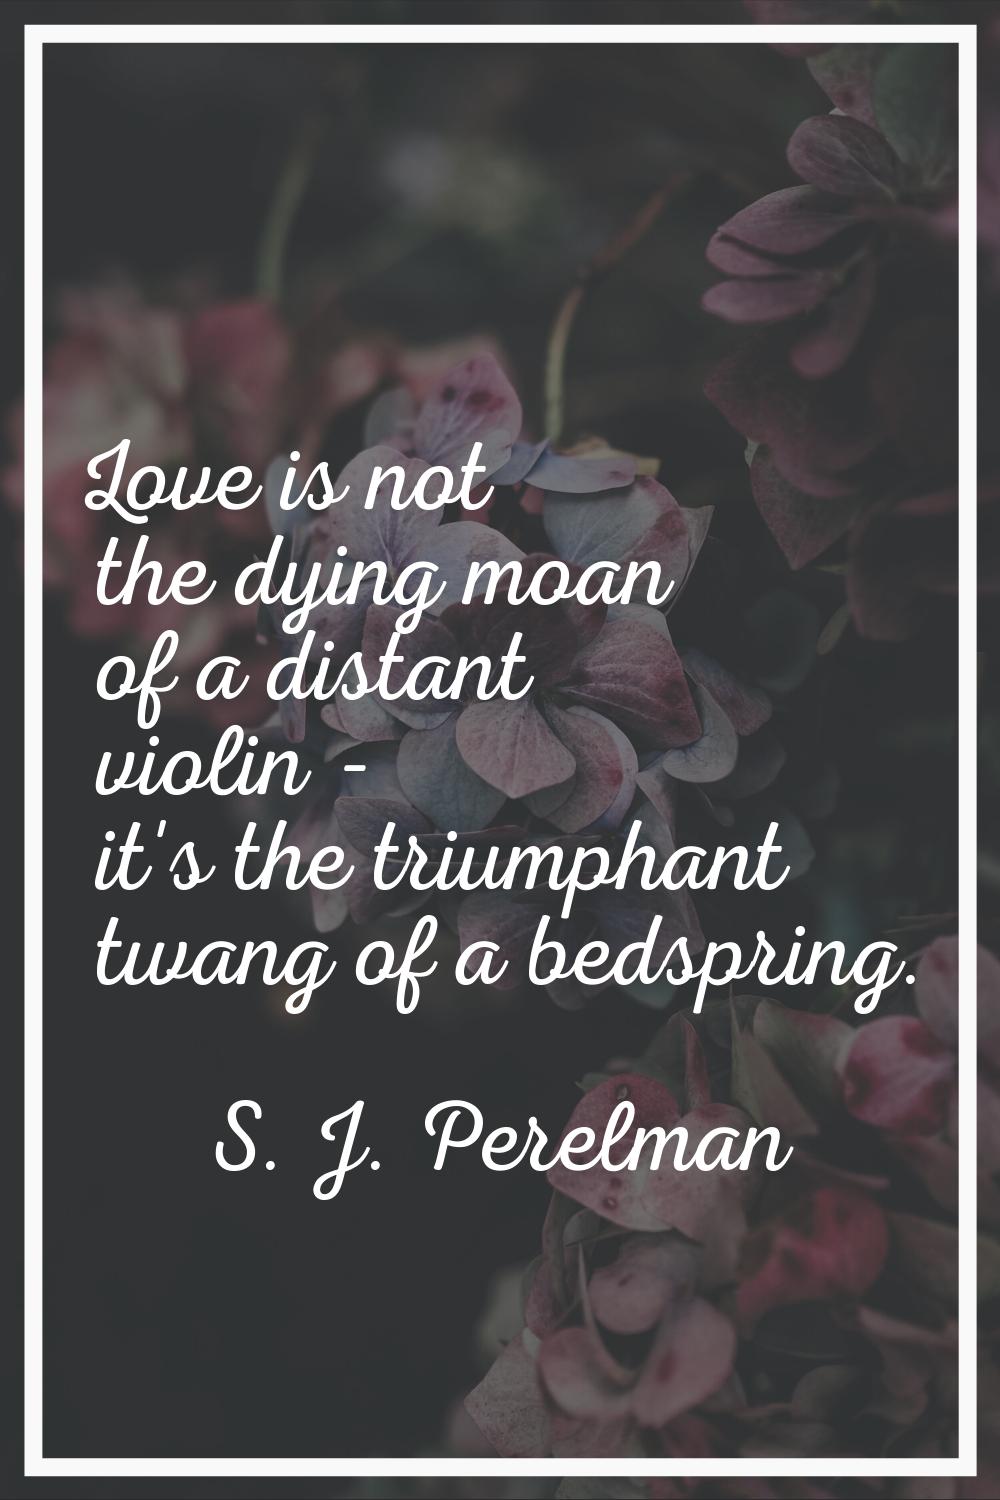 Love is not the dying moan of a distant violin - it's the triumphant twang of a bedspring.